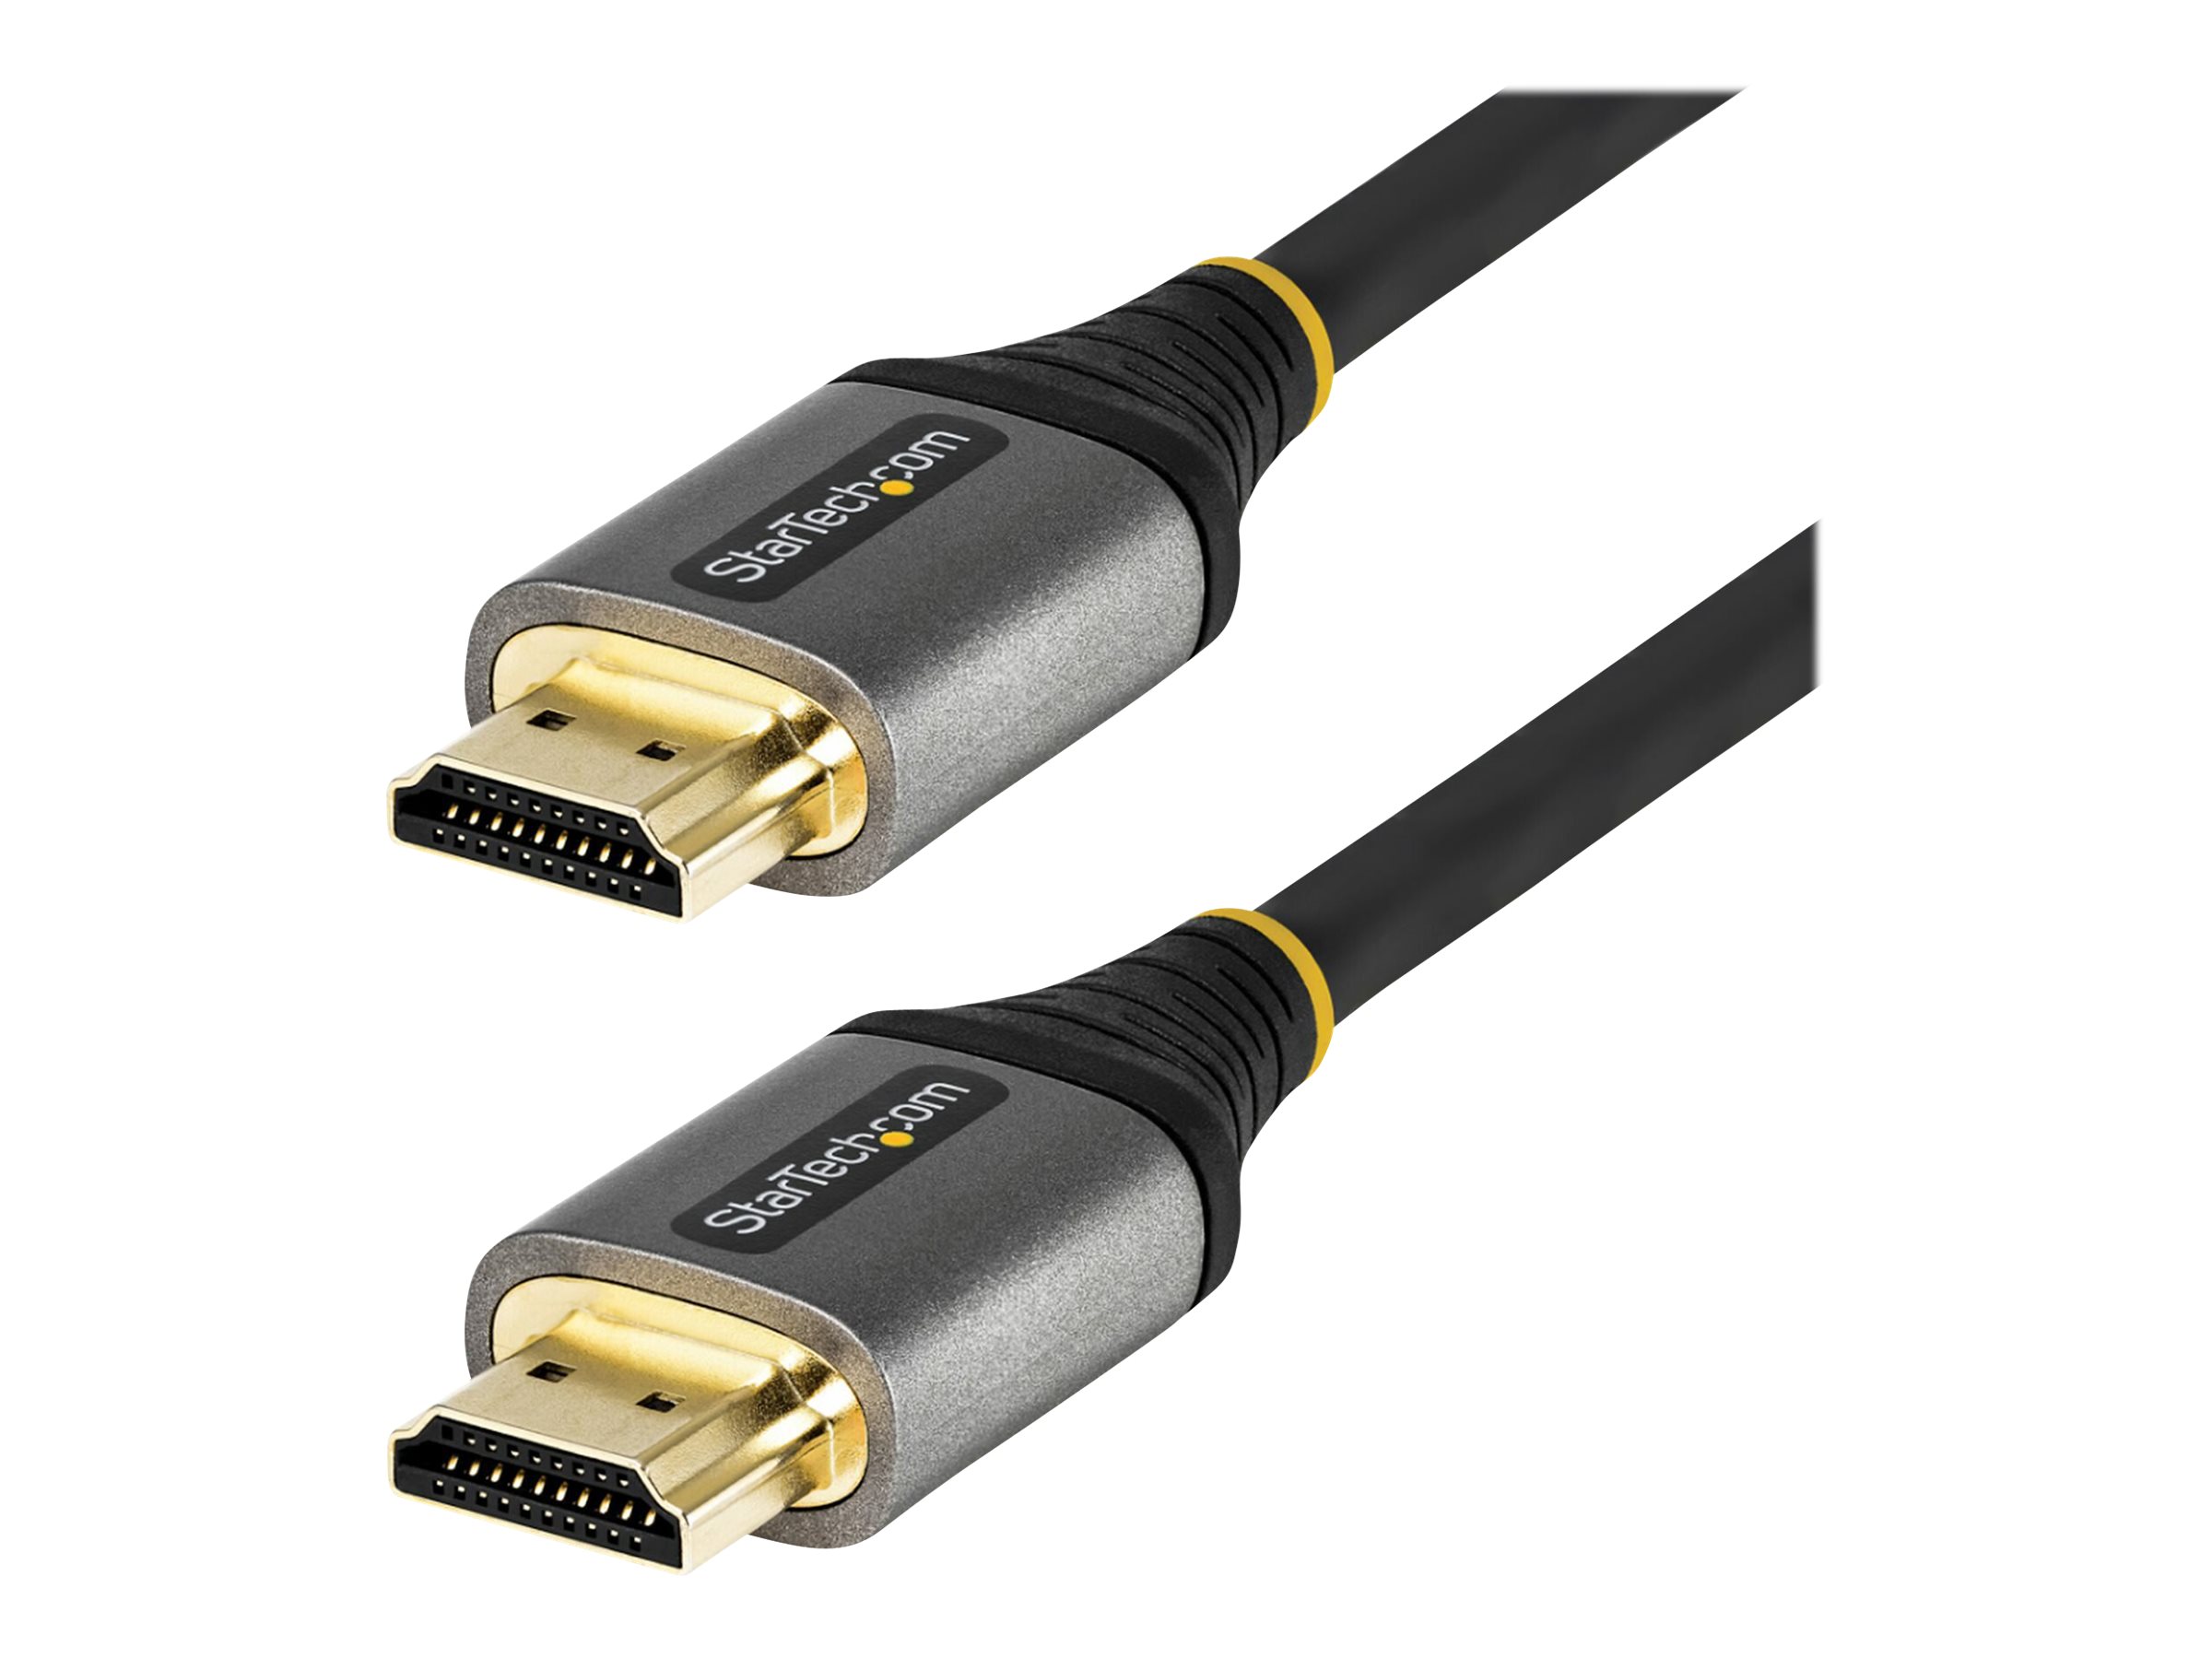 StarTech.com 13ft (4m) Premium Certified HDMI 2.0 Cable - High-Speed Ultra HD 4K 60Hz HDMI Cable with Ethernet - HDR10, ARC - UHD HDMI Video Cord - For UHD Monitors, TVs, Displays - M/M - Premium Highspeed - HDMI-Kabel mit Ethernet - HDMI männlich zu HDMI